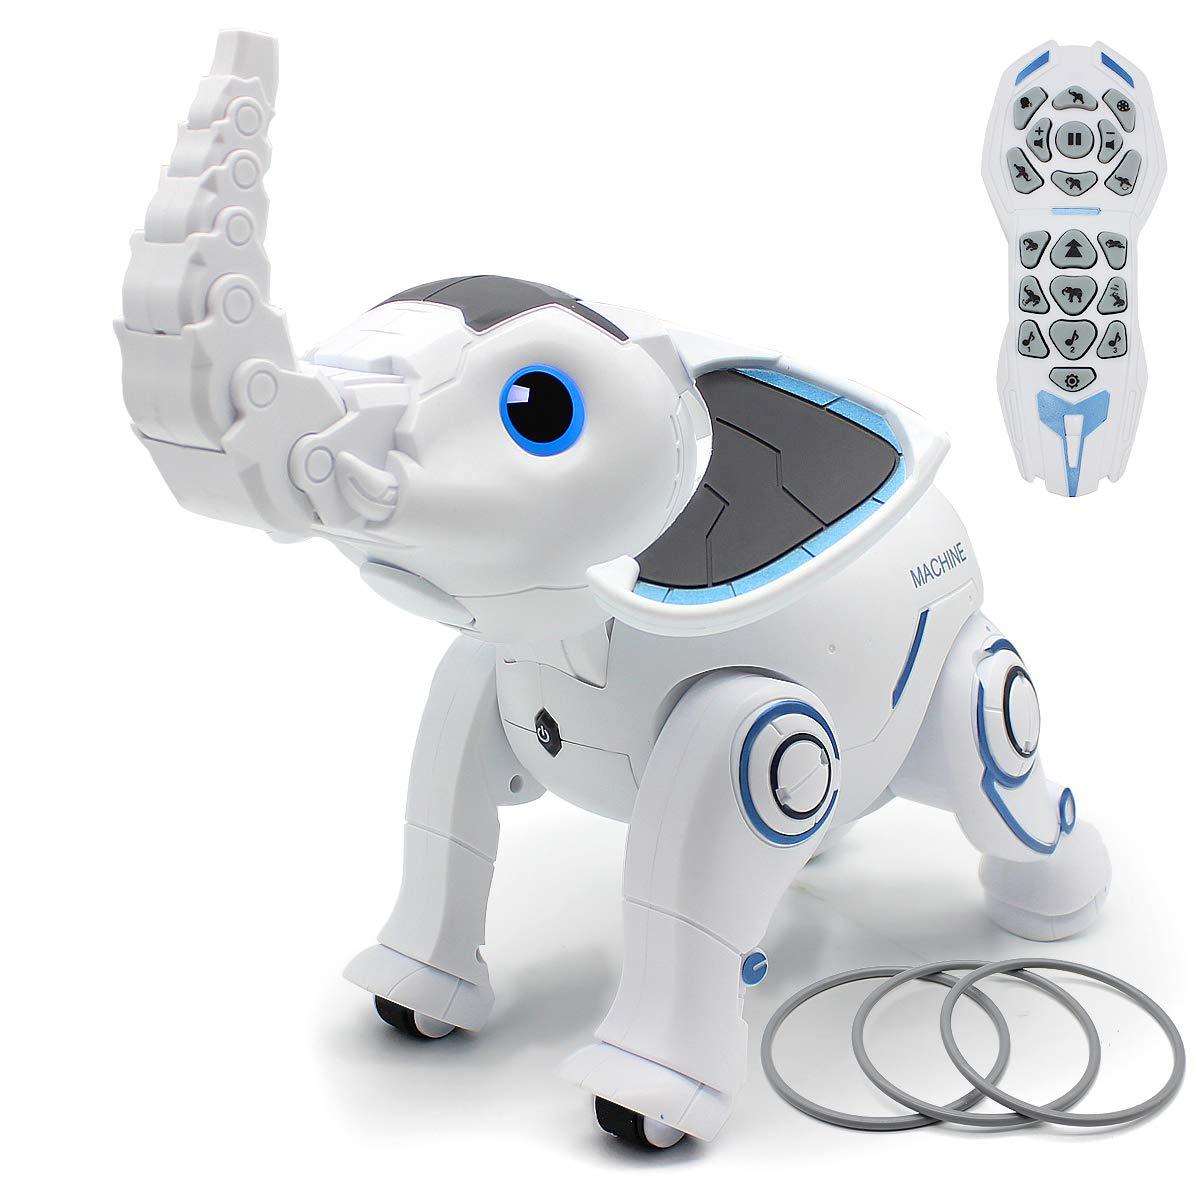 mostop robot toys remote control robotic elephant rc programming interactive robot voice control intelligent electronic toys 